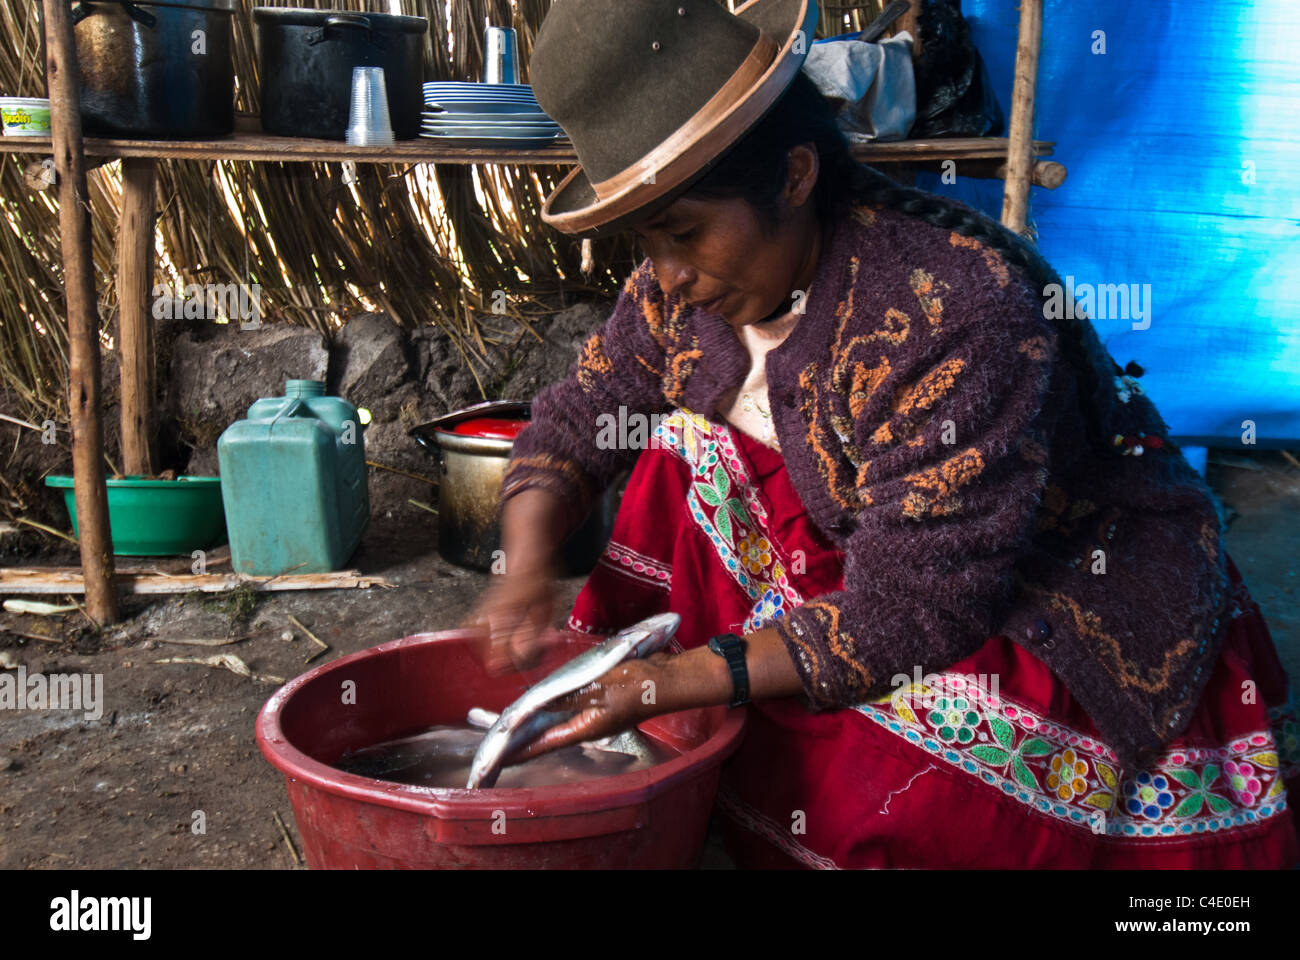 Peasant woman wearing hat in traditional dress cleaning trout in a simple reed hut in the Peruvian Andes Stock Photo